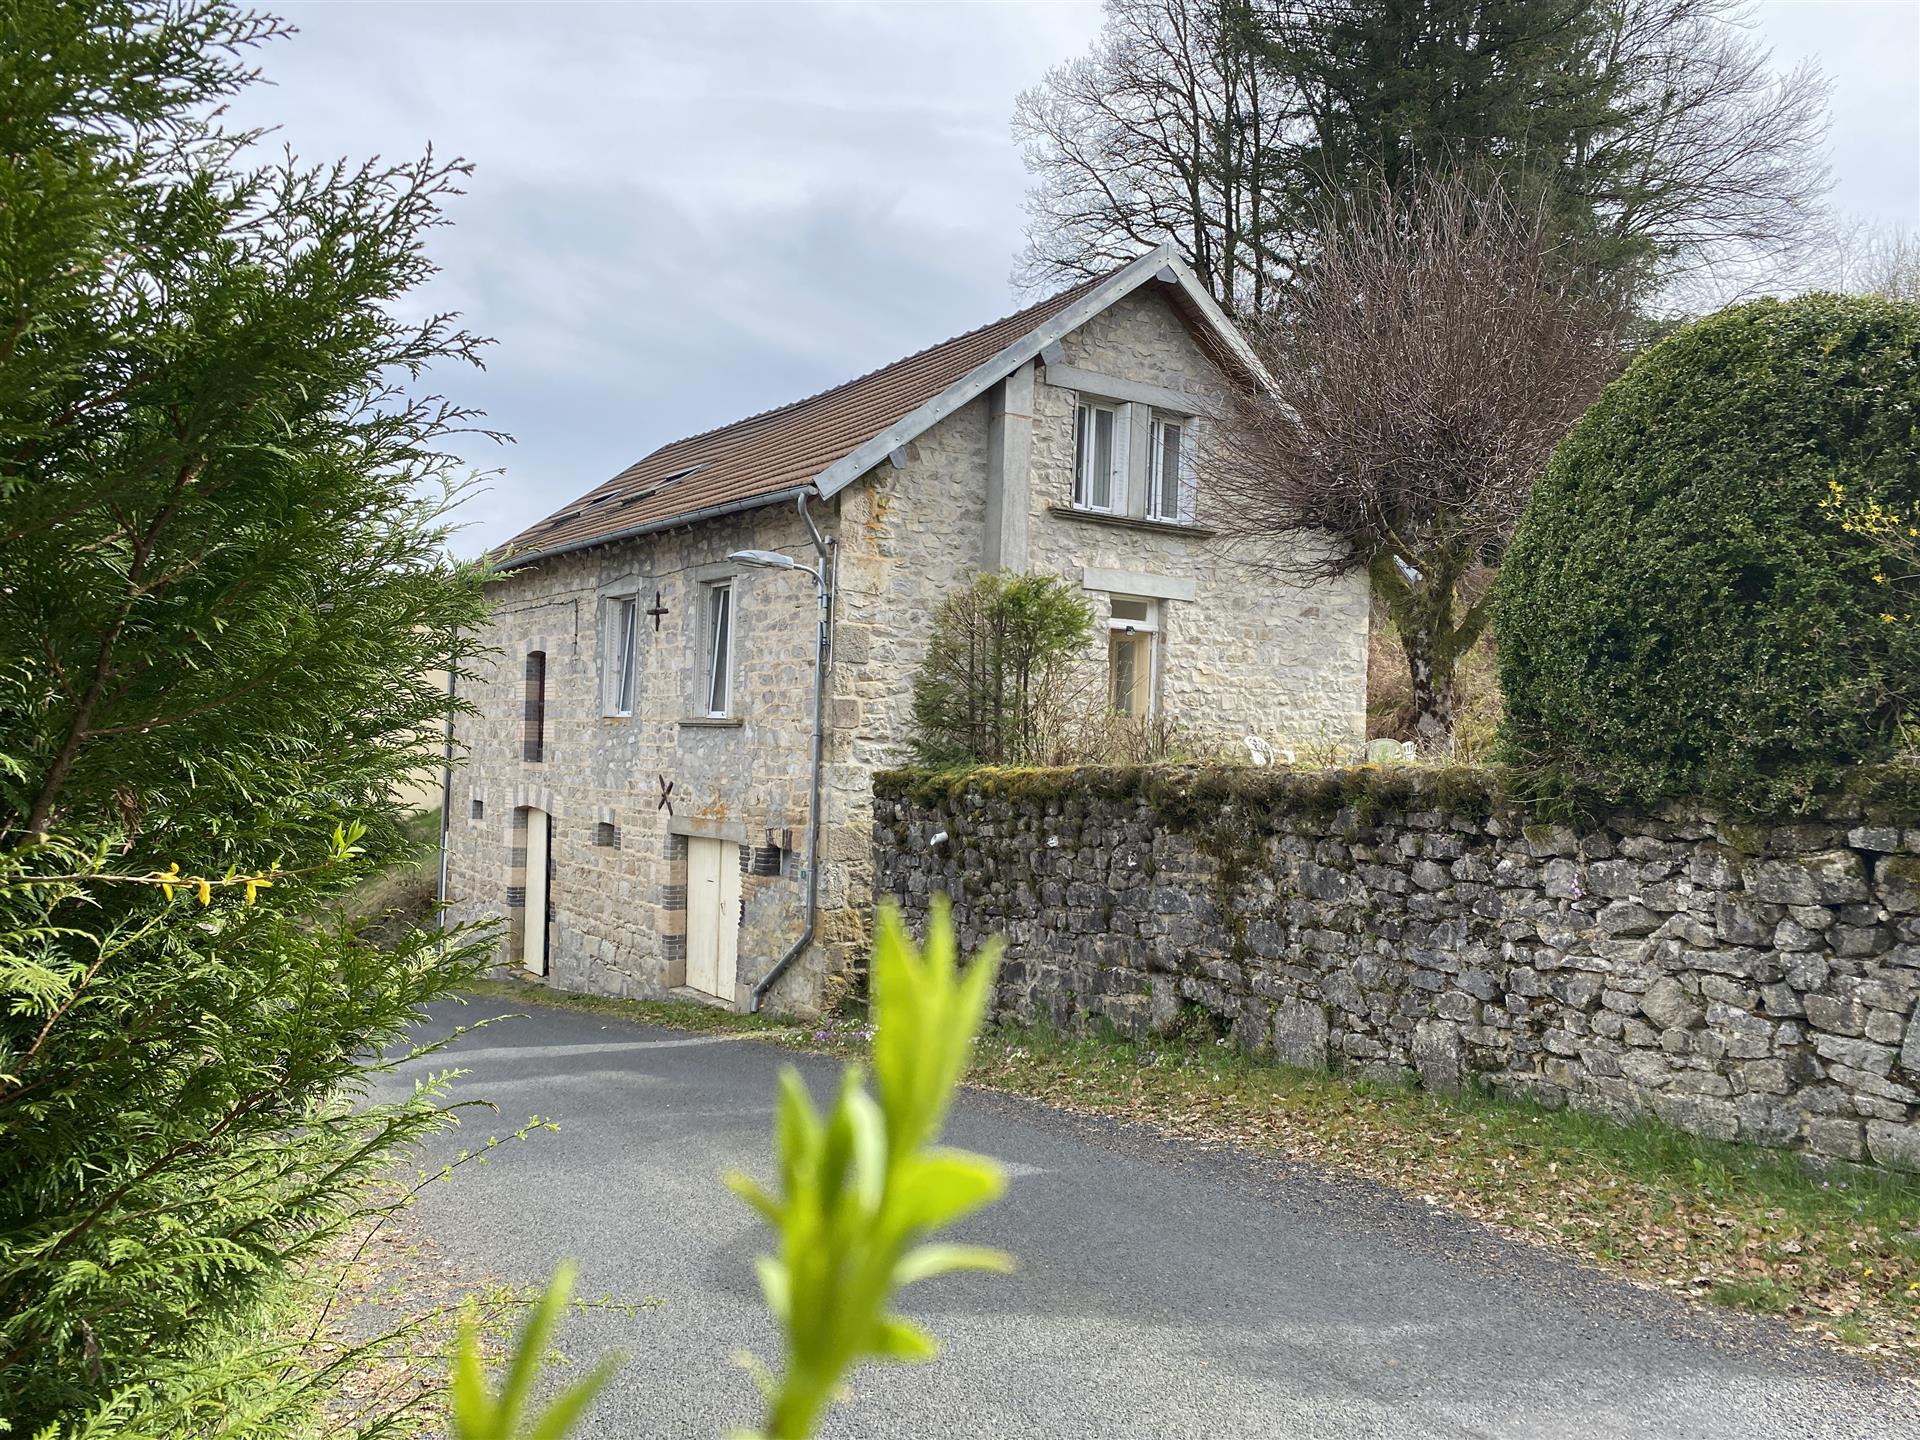 Attractive stone house,Main rooms bedroom and bathroom on ground floor, land.